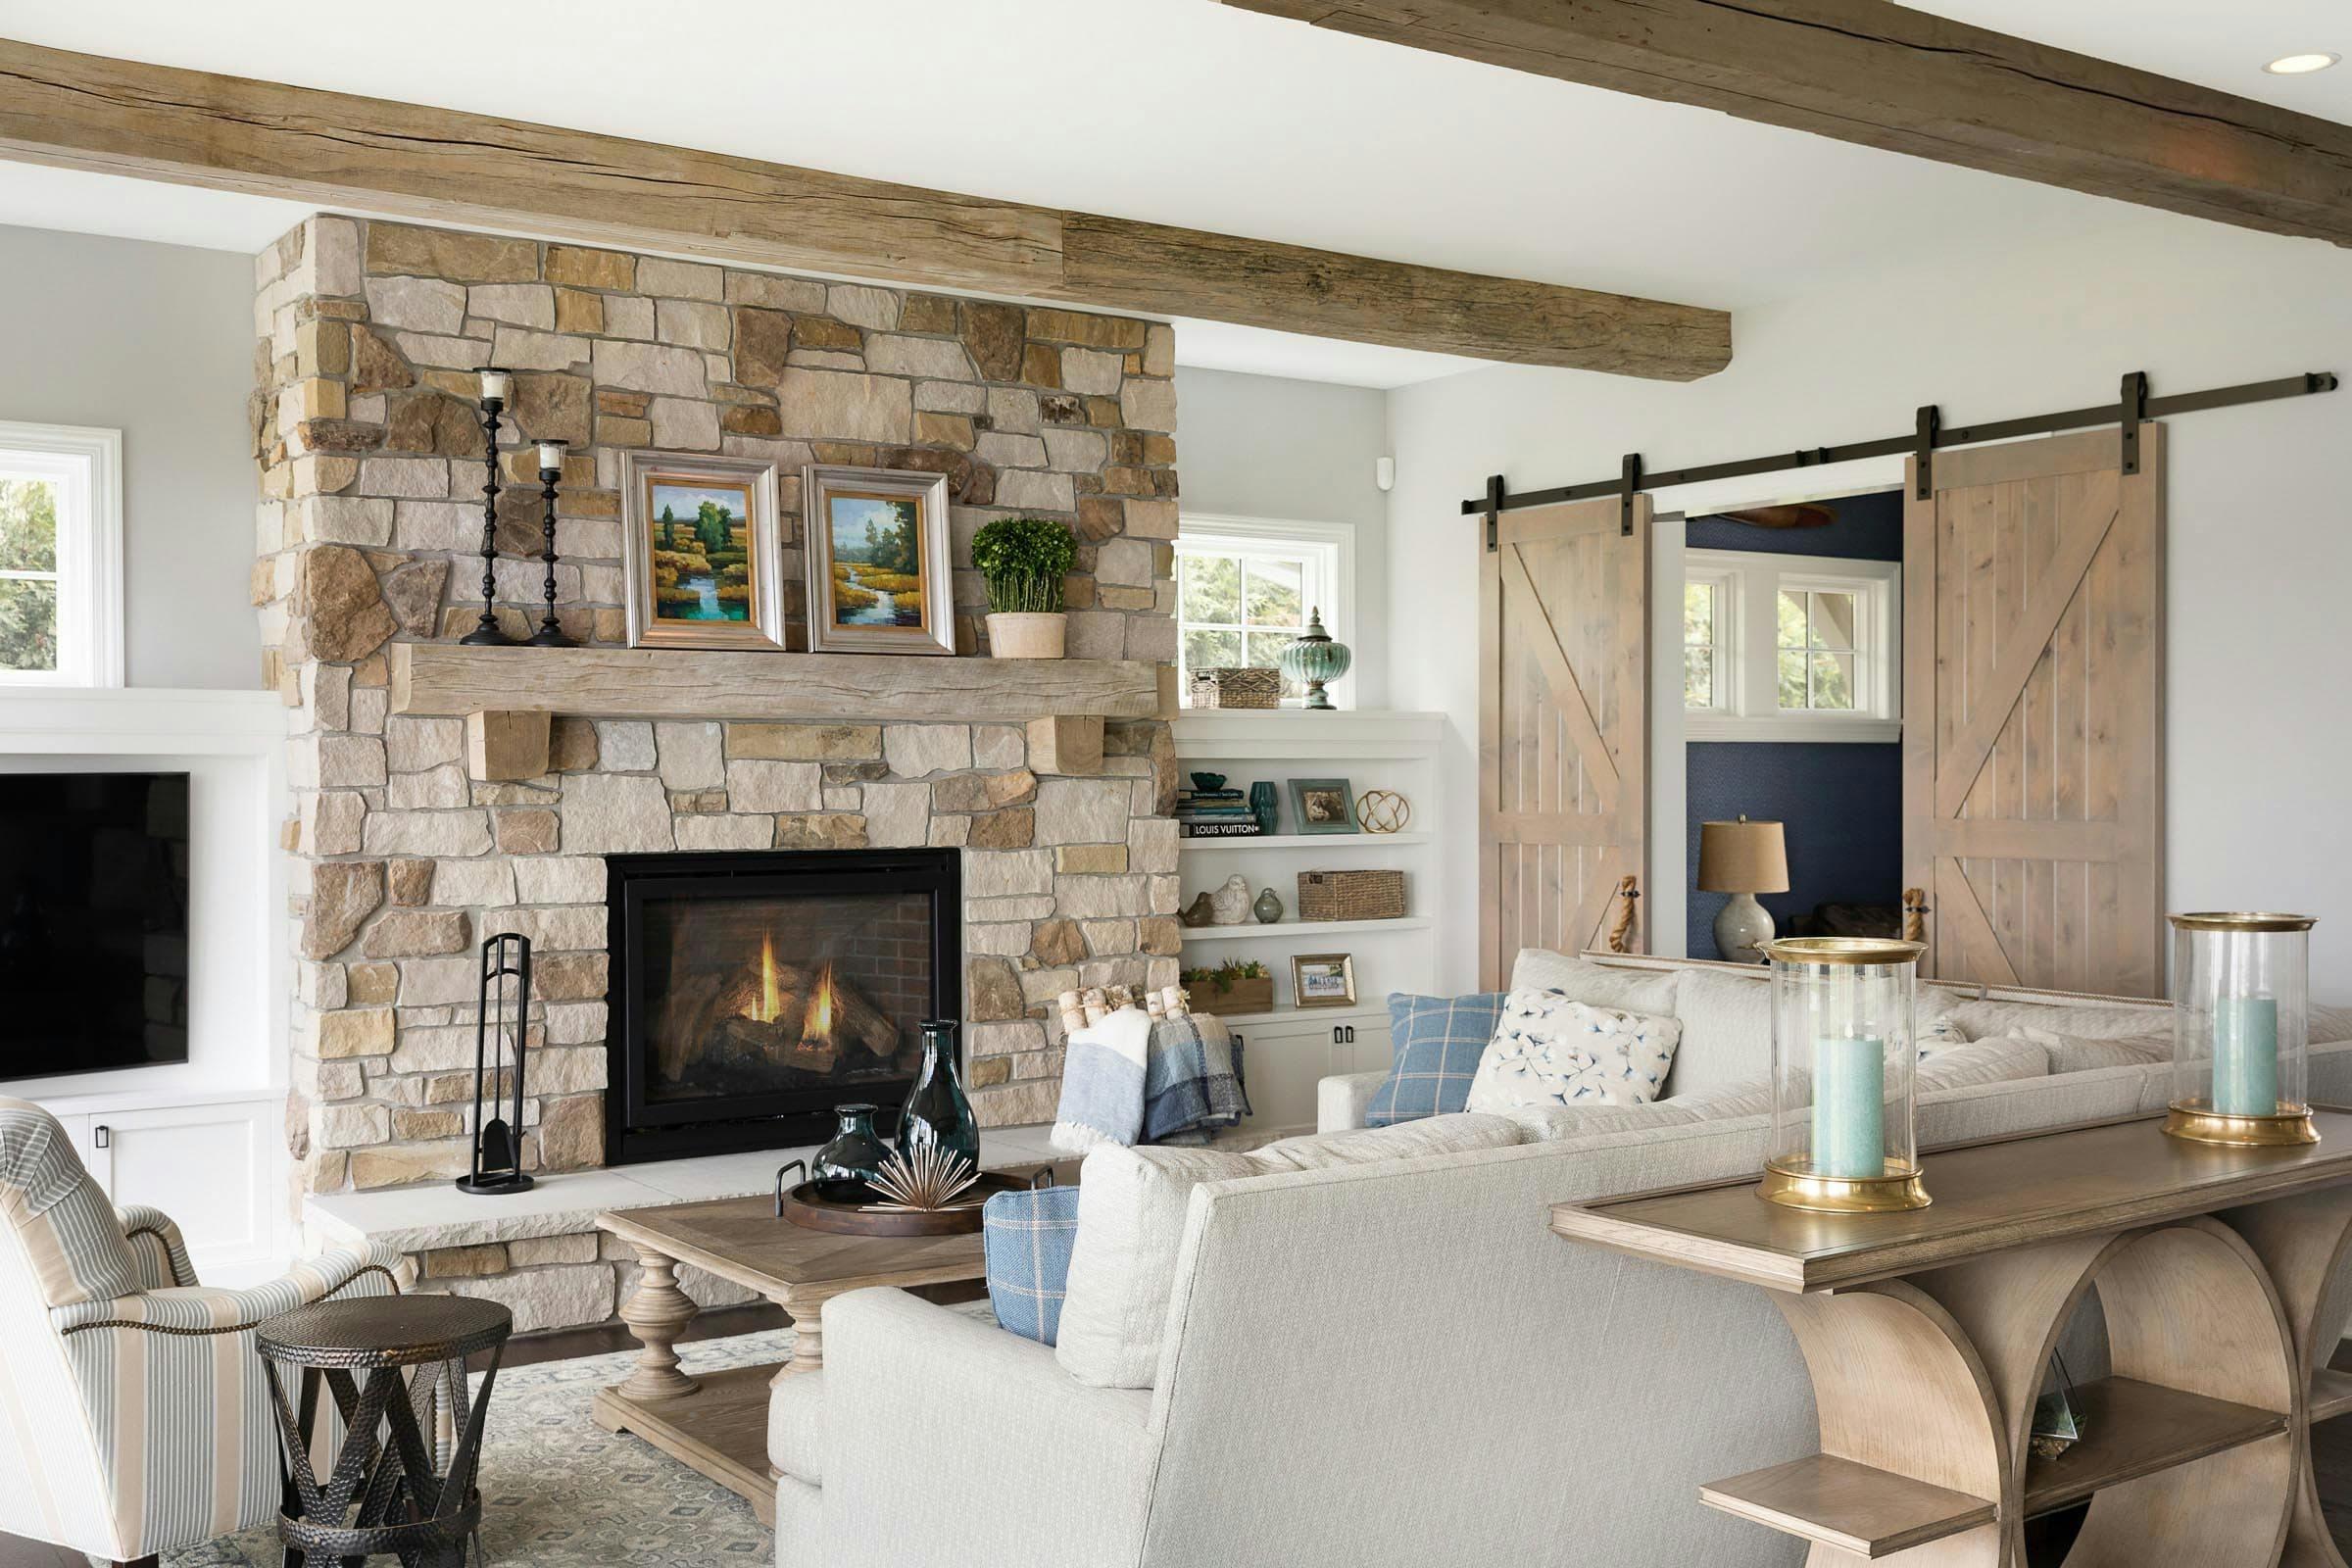 Living room with fireplace and through barn doors is the office